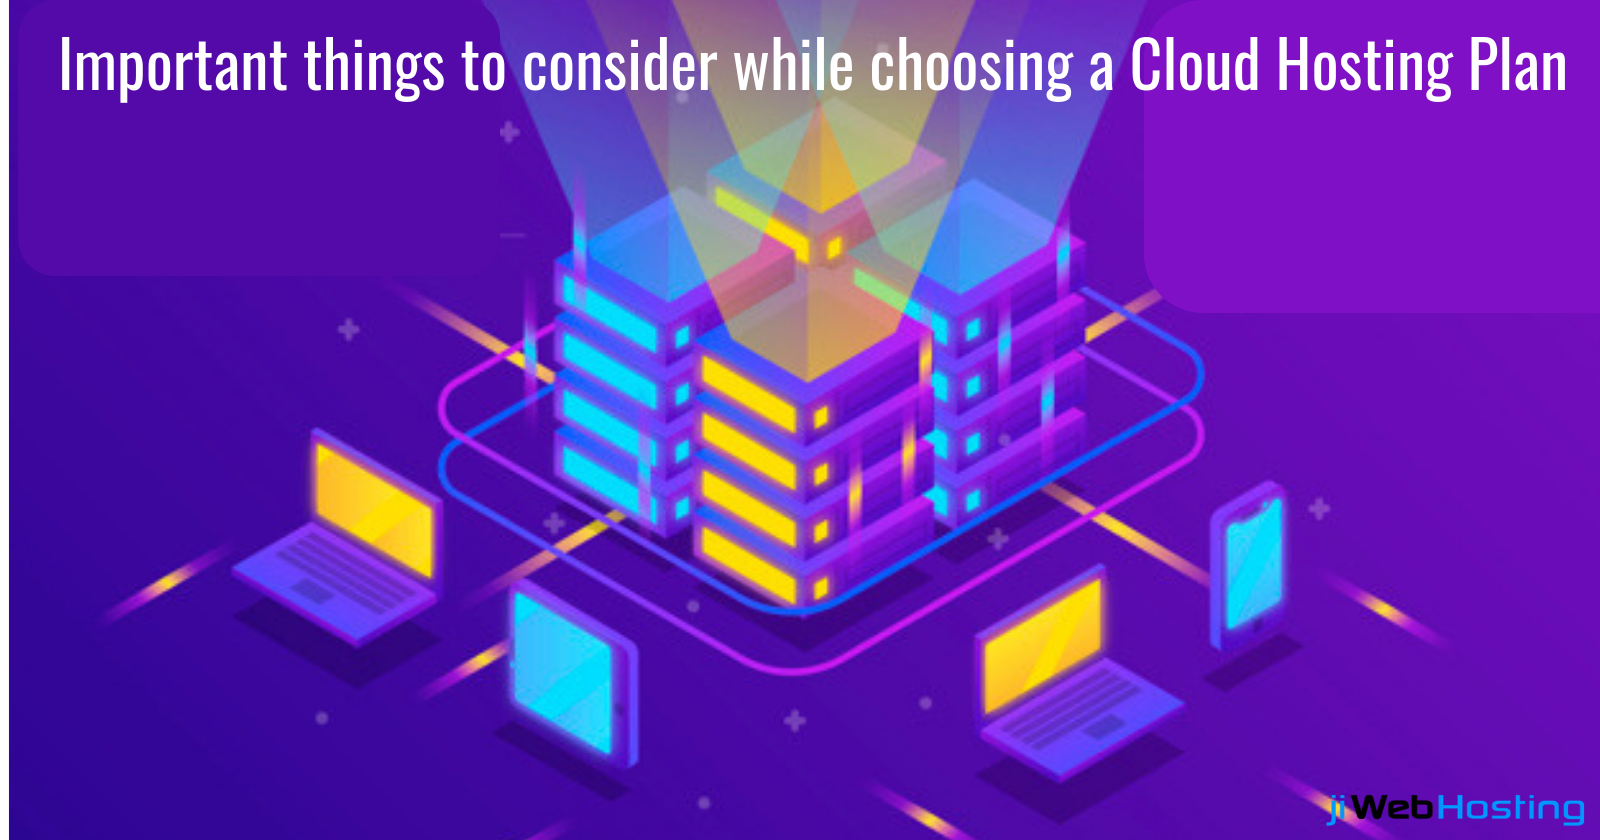 Important Things to Consider While Choosing a Cloud Hosting Plan